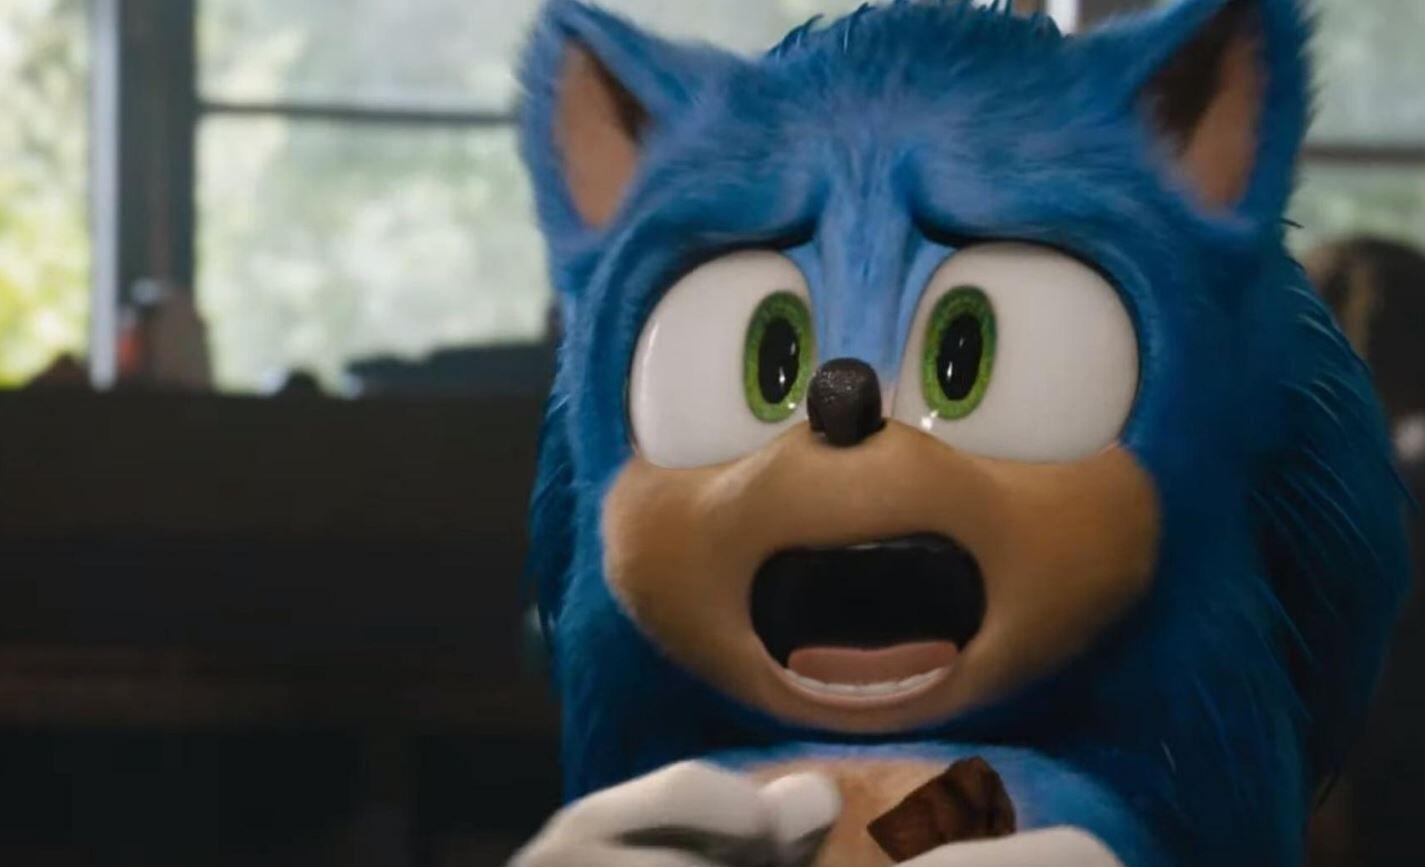 New ‘Sonic The Hedgehog’ Trailer Shows Off Redesigned Sonic1425 x 867